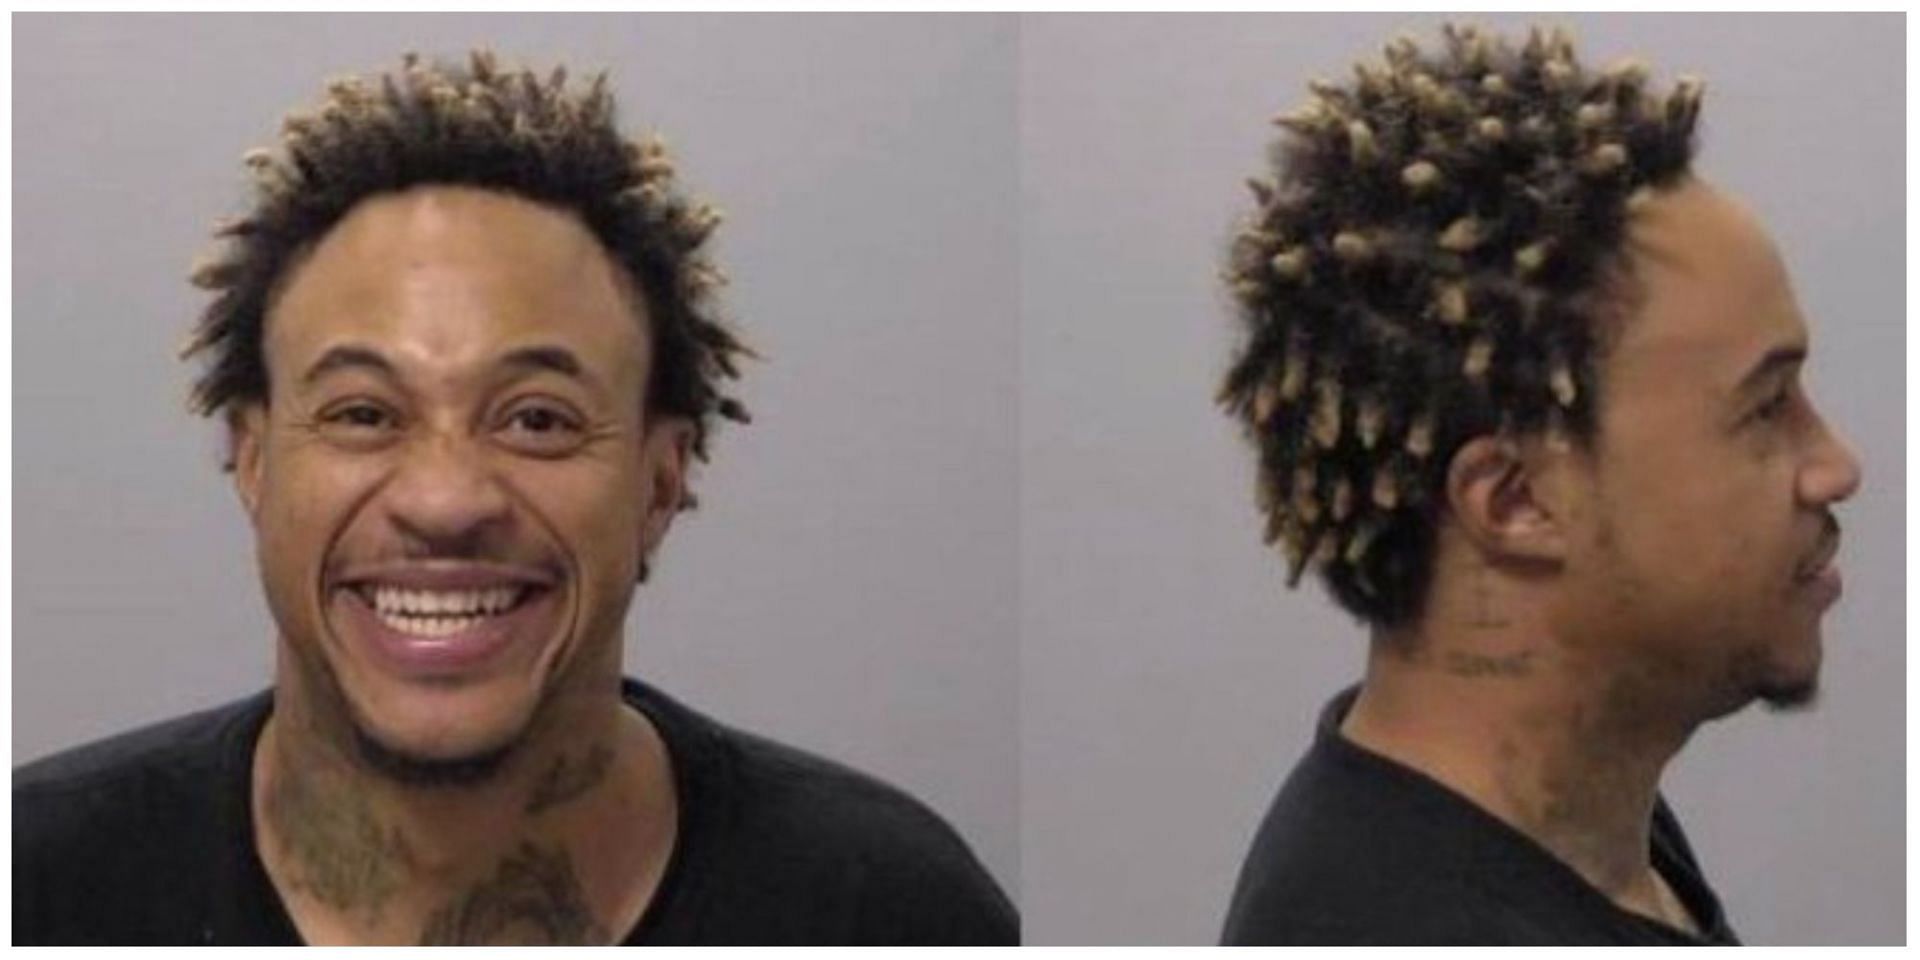 Orlando Brown arrested on charges of domestic violence after being homeless for many months. (Image via Twitter)